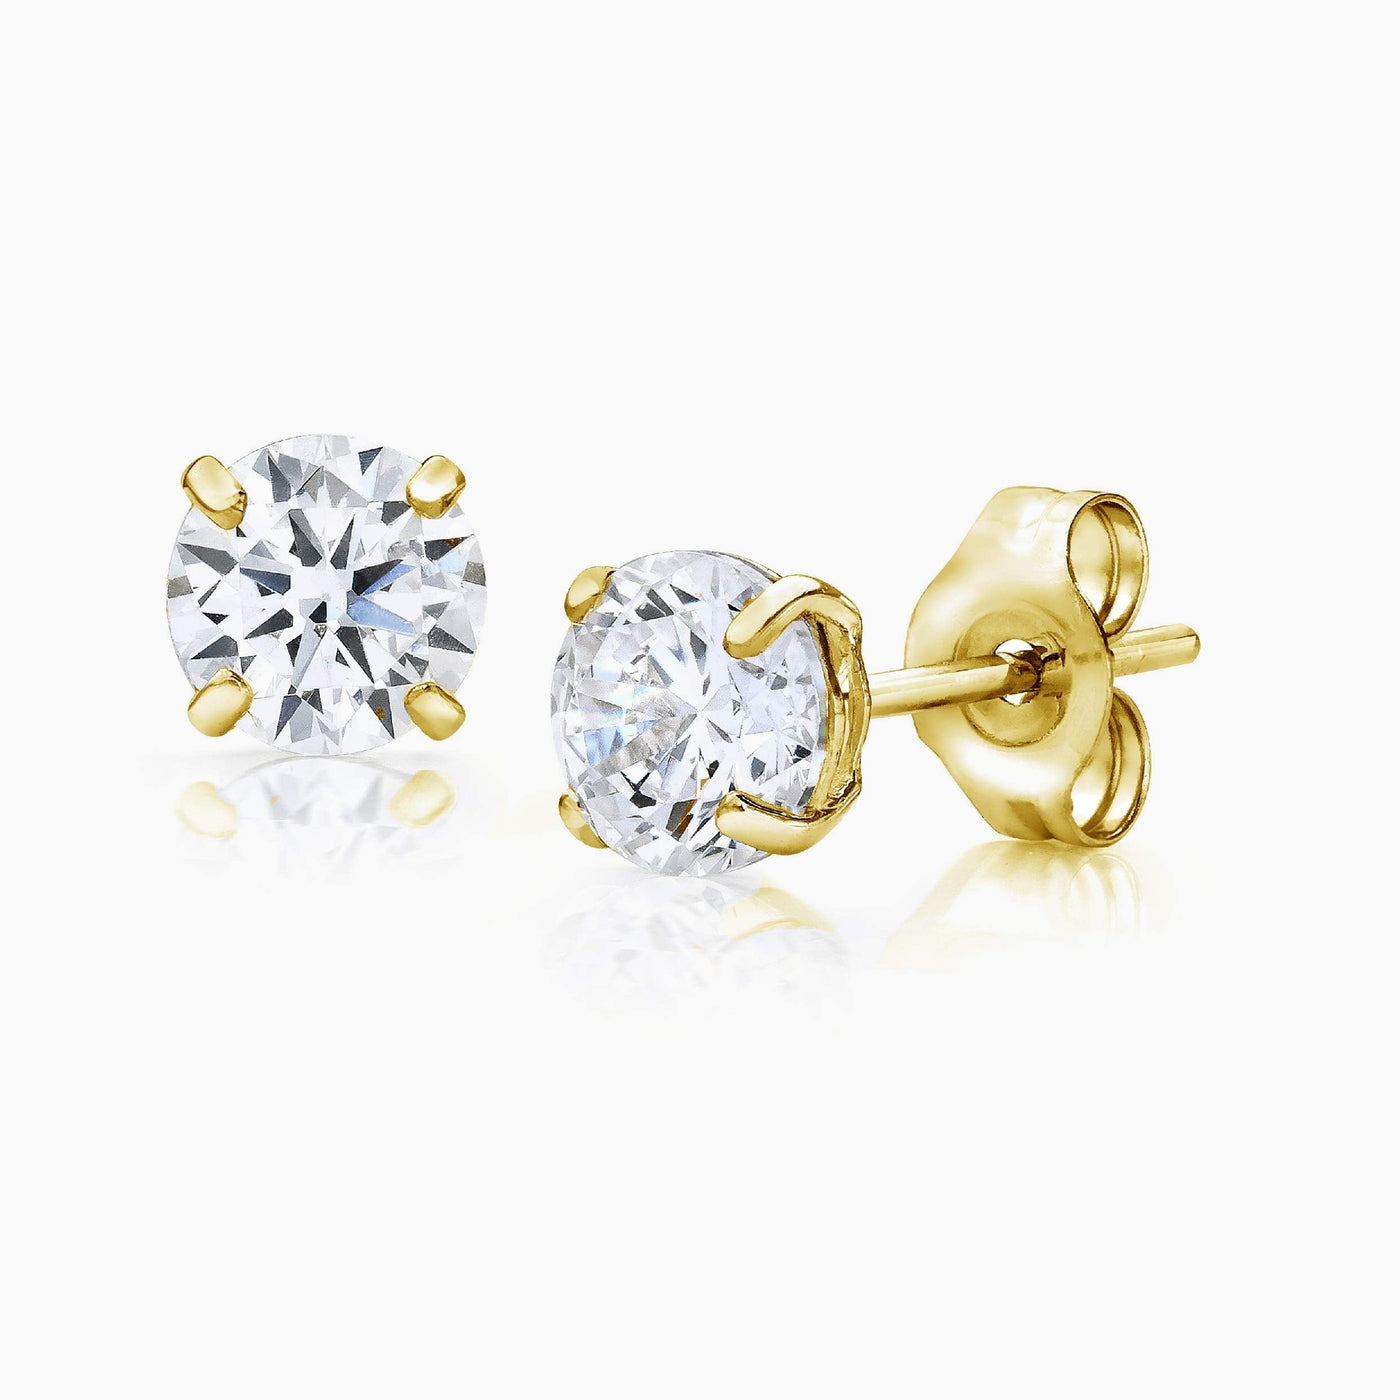 14K Gold Round CZ Stud Earrings - Available in White, Yellow, or Rose Gold